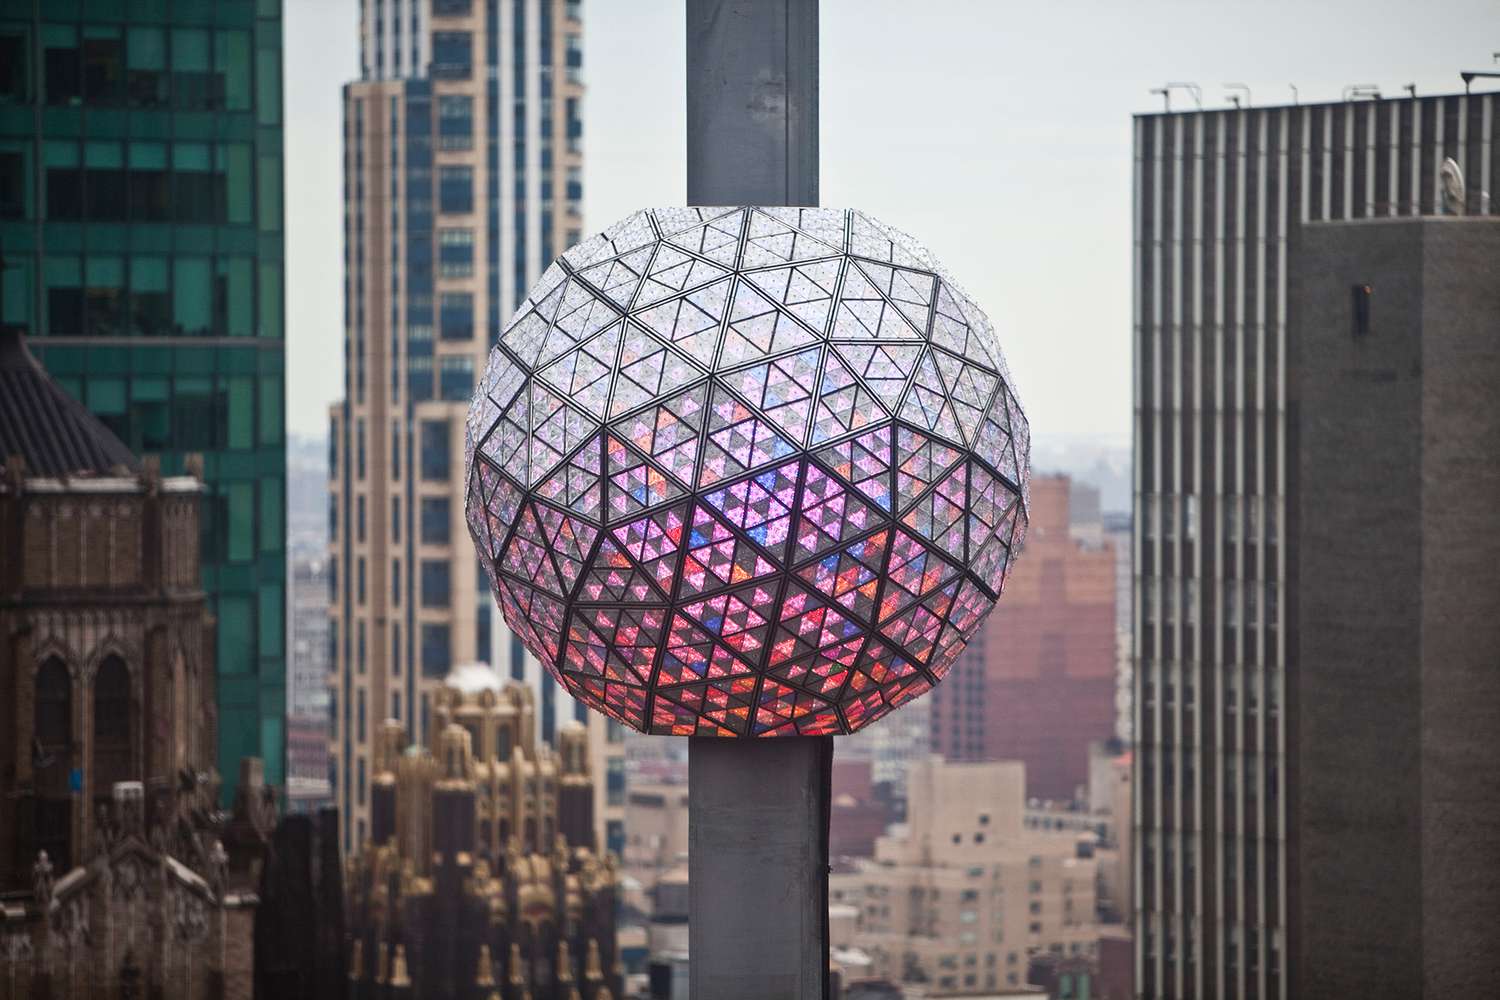 How To Watch The Ball Drop In New York